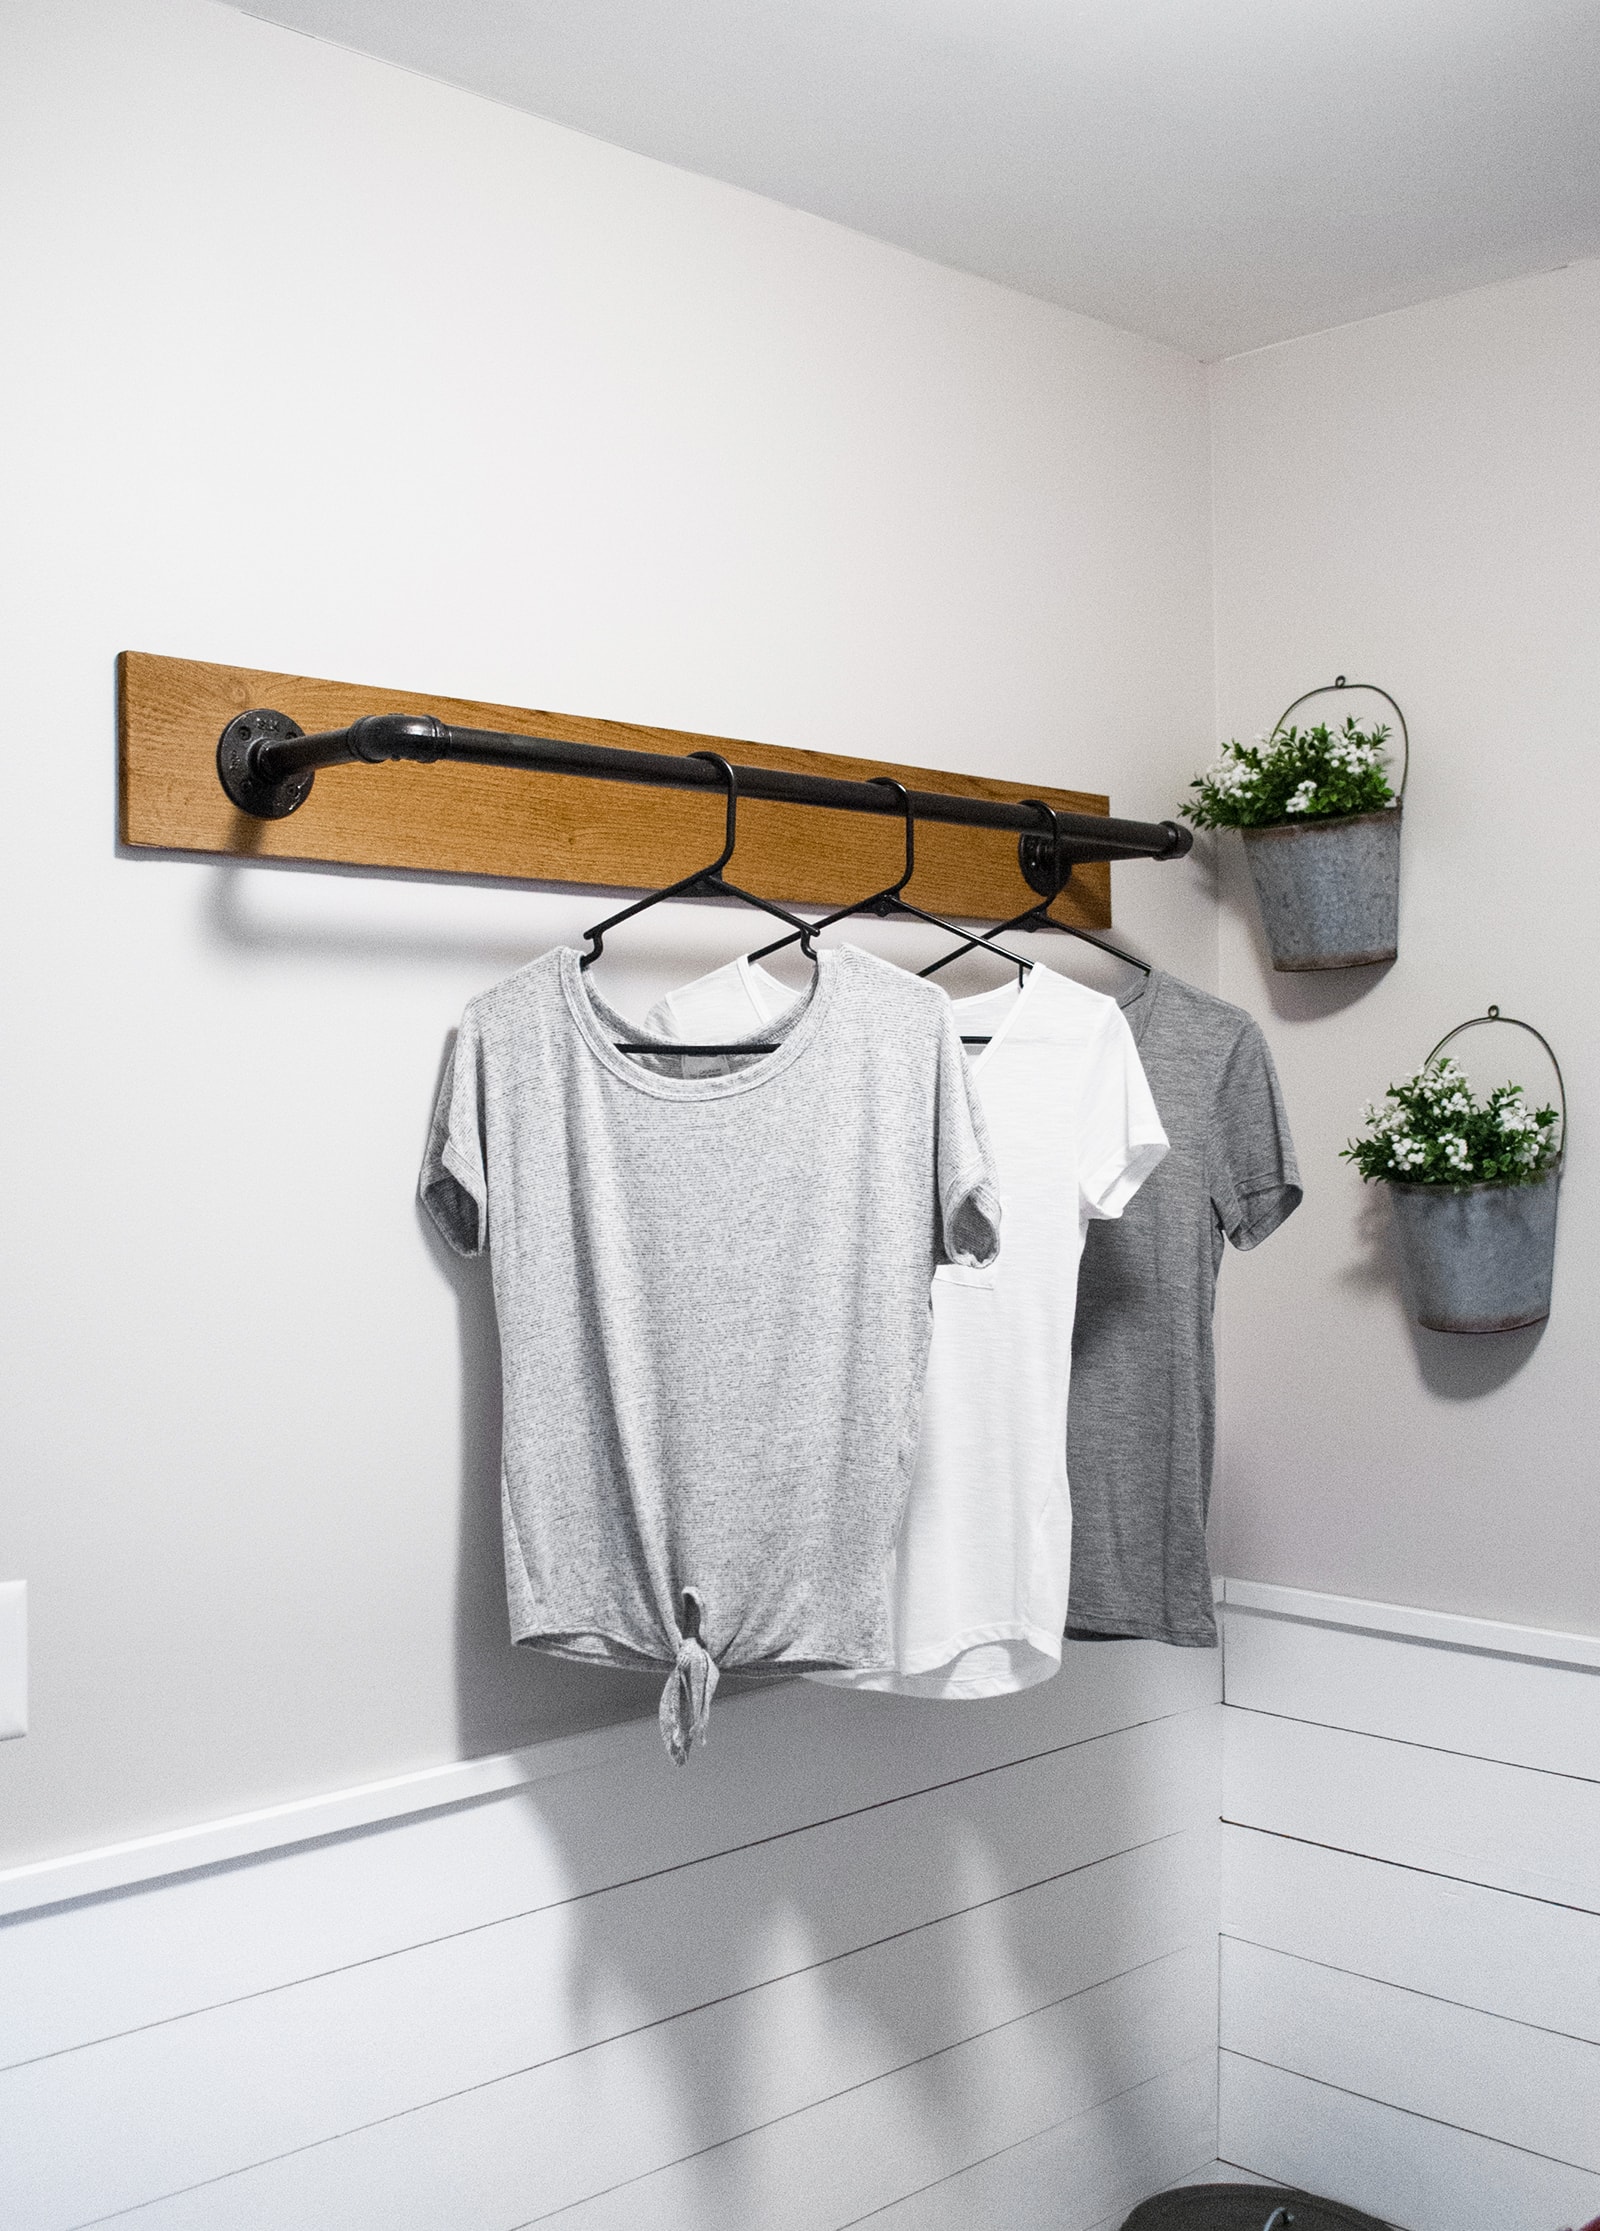 Details about   Industrial Pipe Clothes Rack Wall Mounted DIY Clothing Rod Bars Towel Hanger 